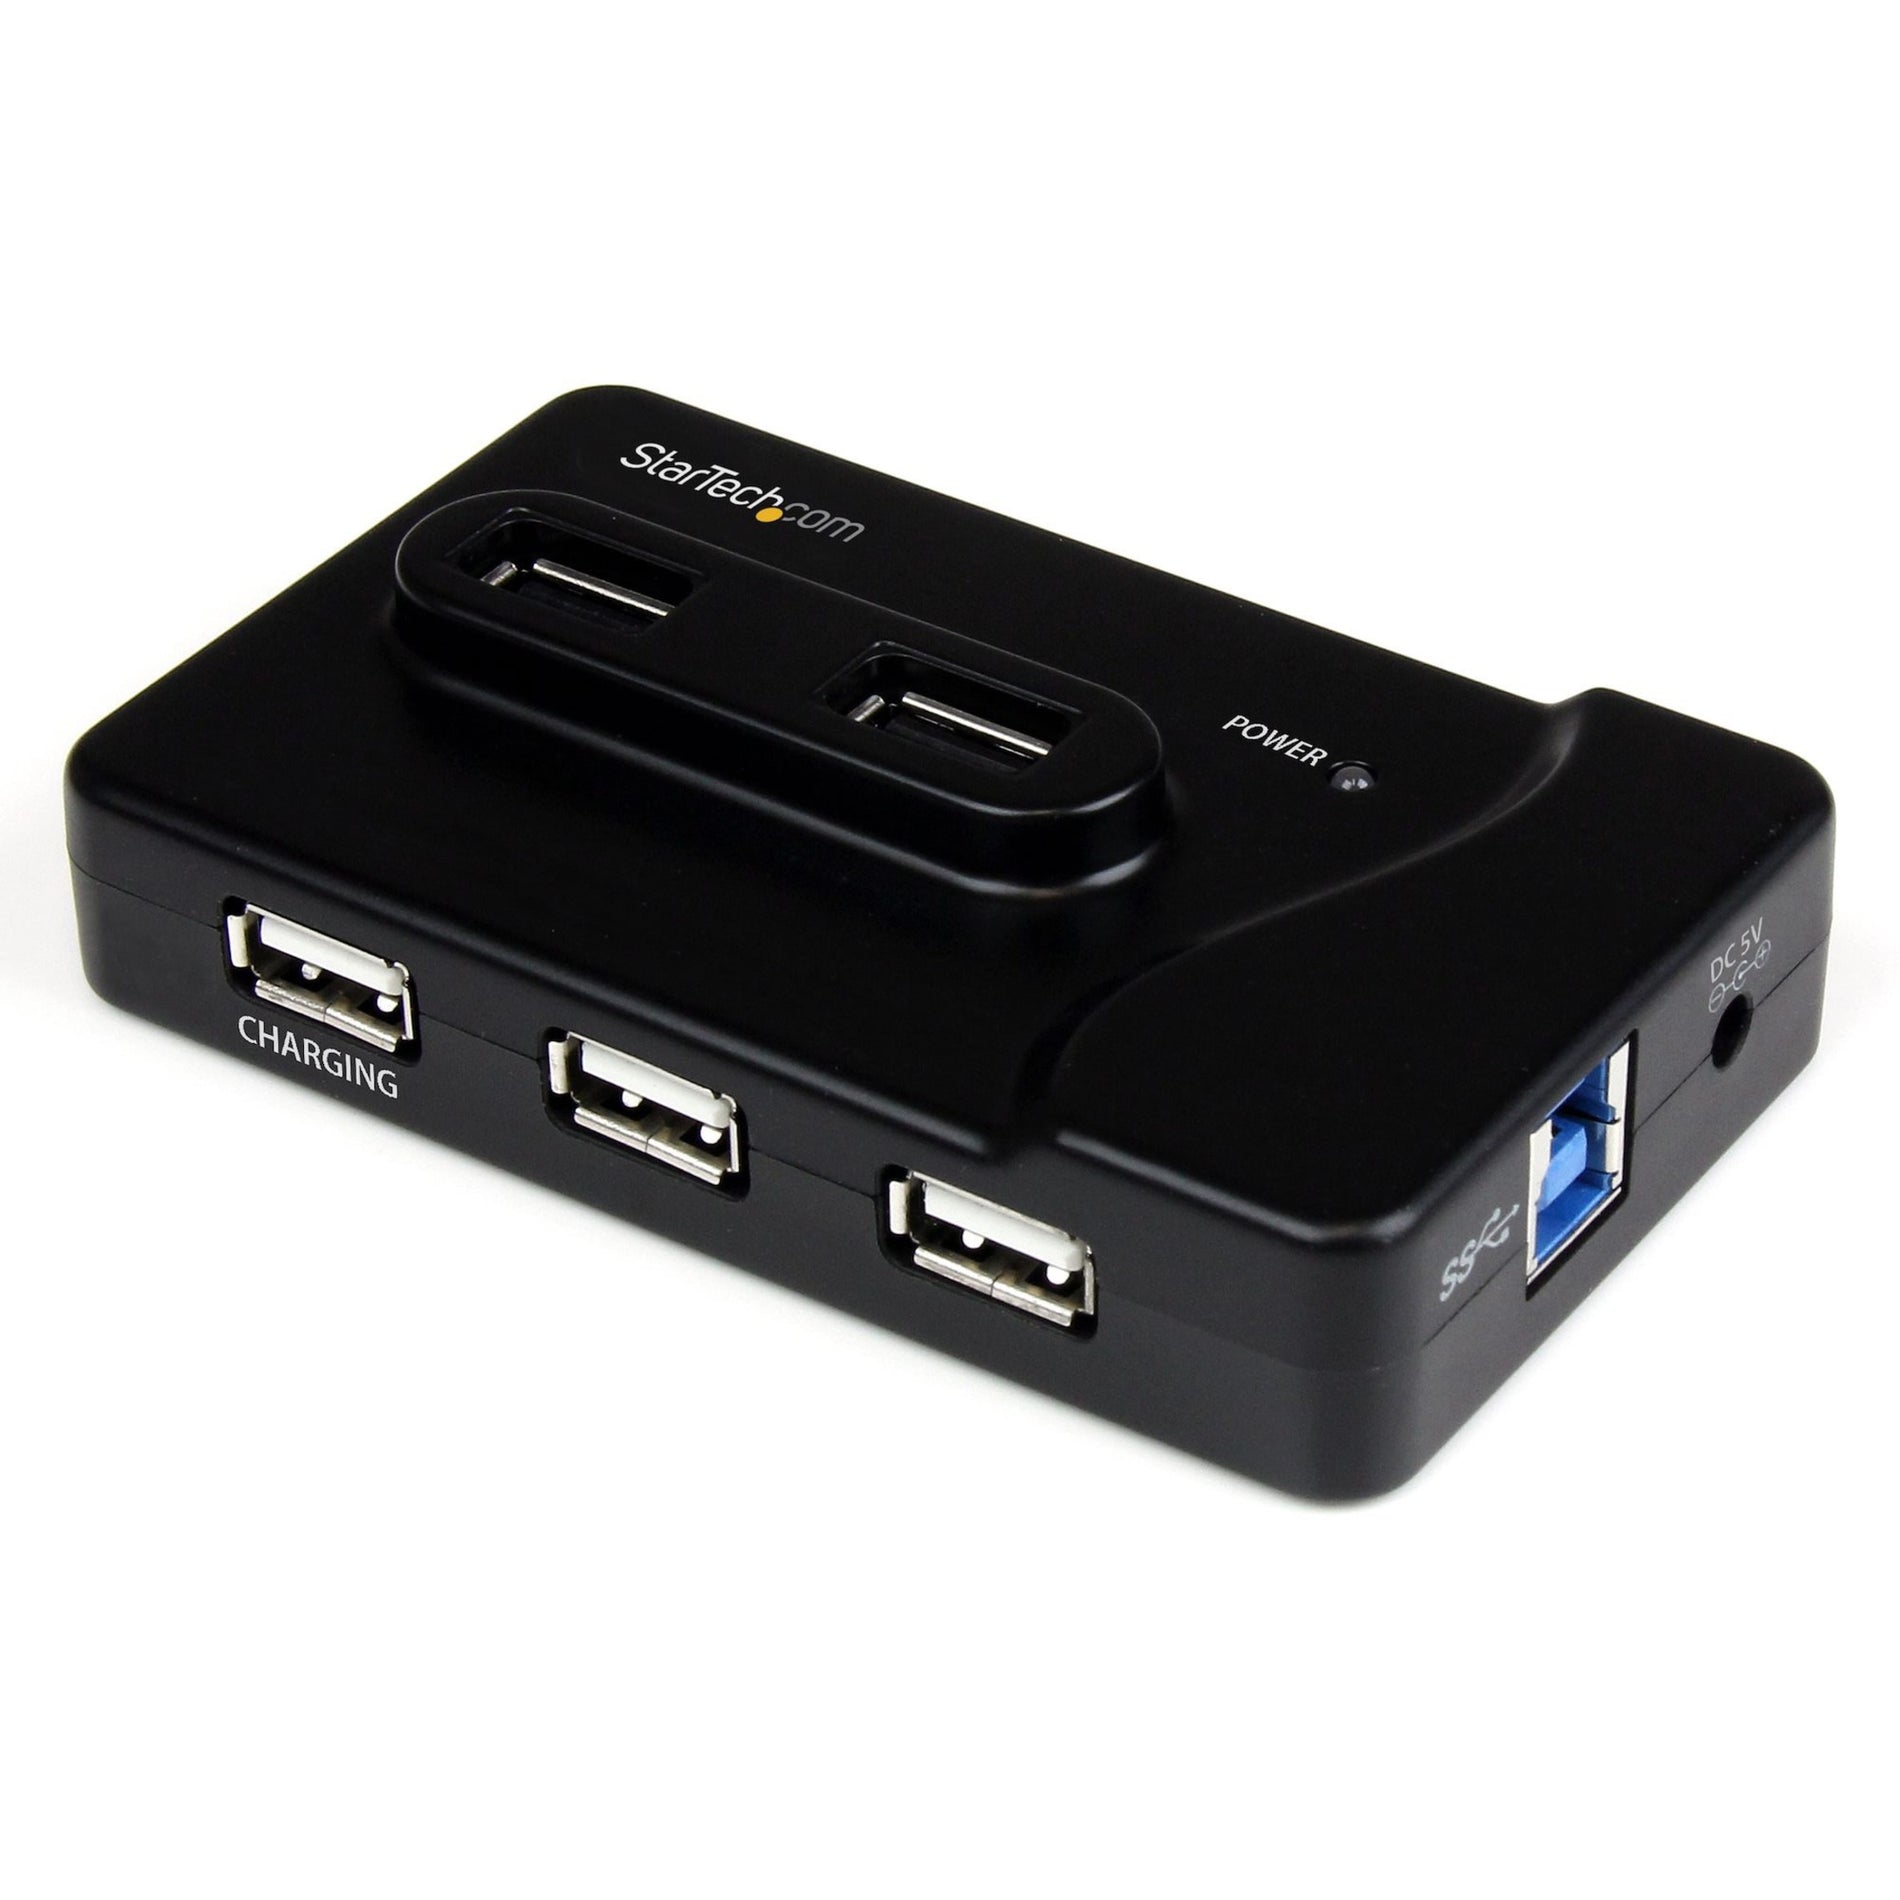 StarTech.com ST7320USBC 6-port USB 3.0/2.0 Combo Hub with Charging Port, Expand Your USB Connectivity